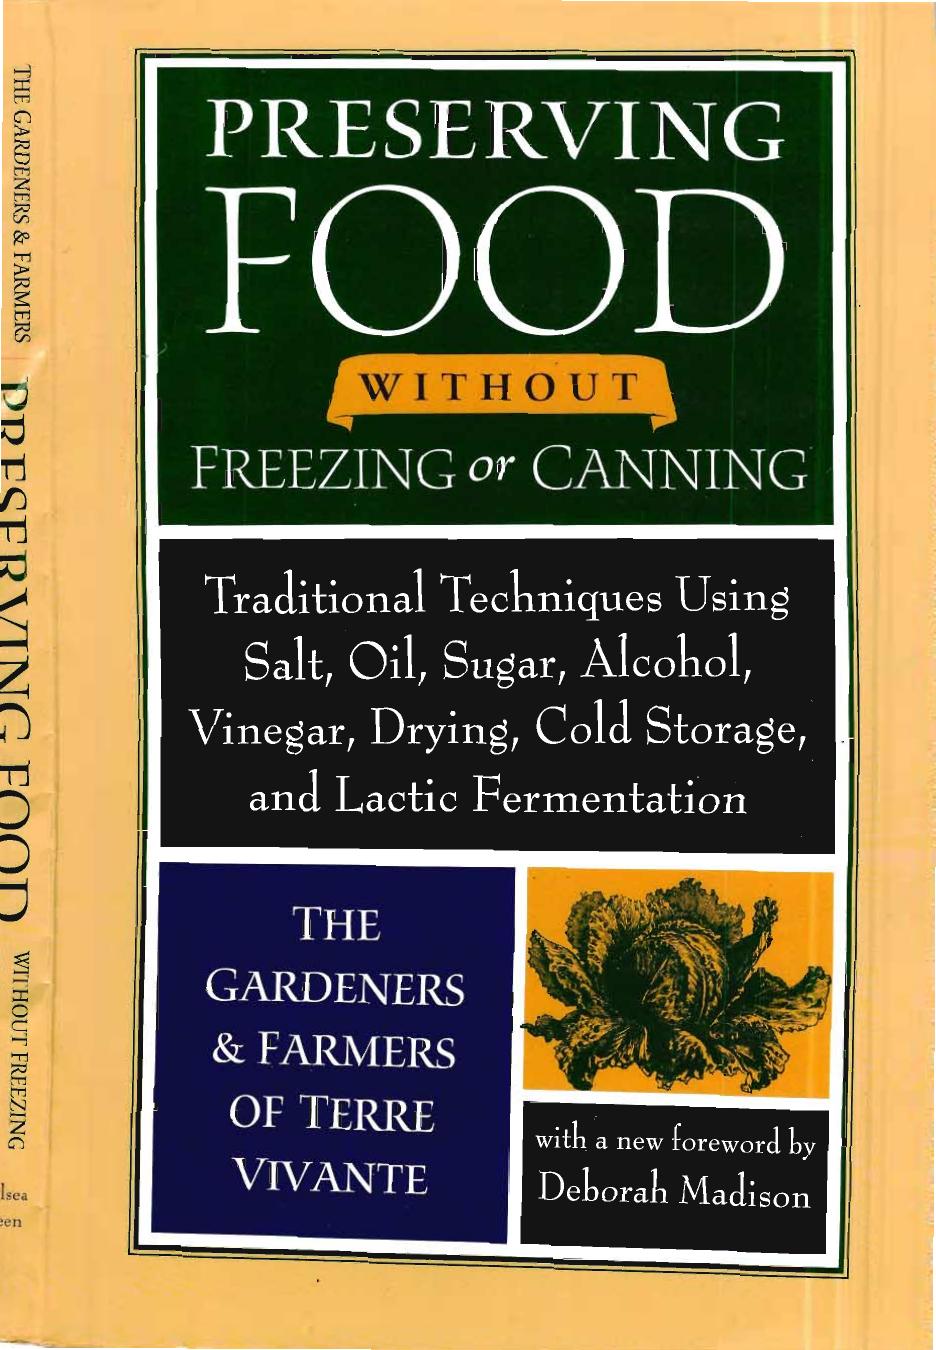 Preserving Food without Freezing or Canning Traditional Techniques Using Salt, Oil, Sugar, Alcohol, Vinegar, Drying, Cold Storage, and Lactic Fermentation 1999